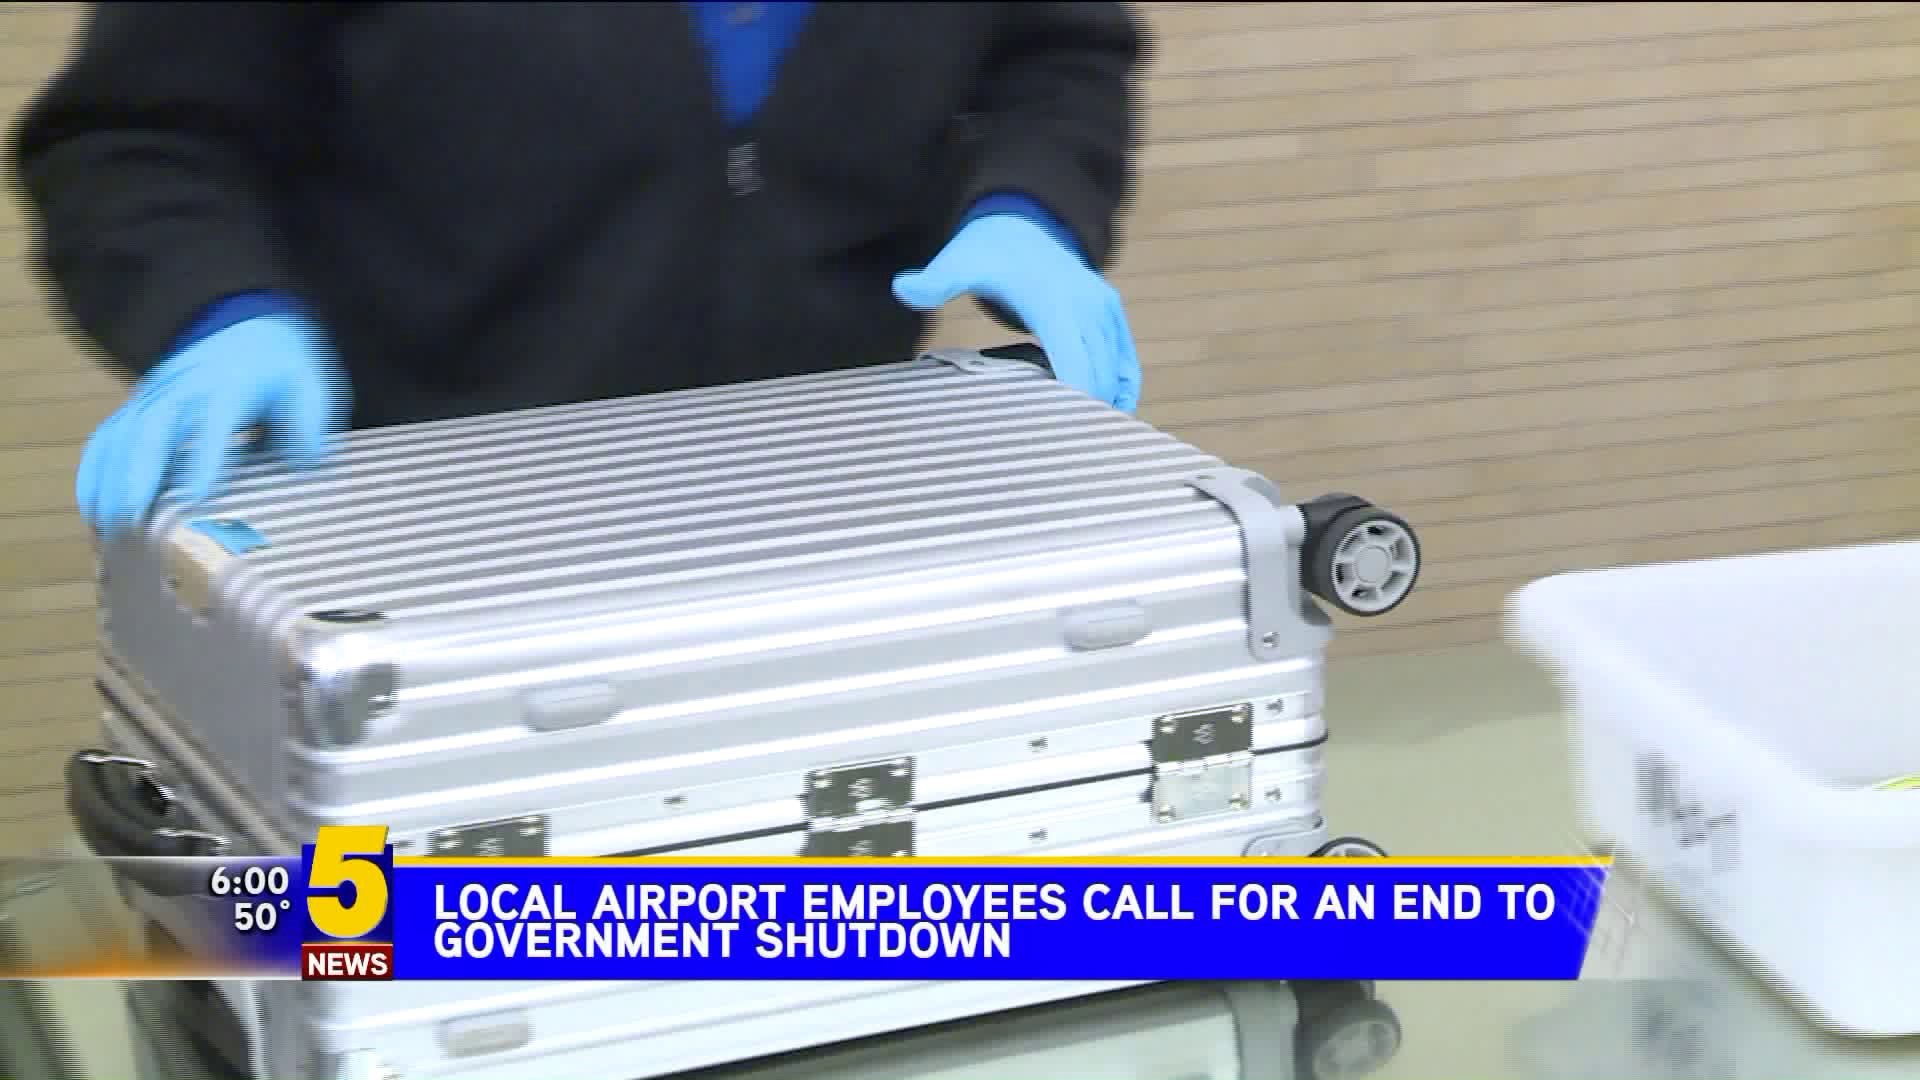 Local Airport Employees Call For An End To Government Shutdown